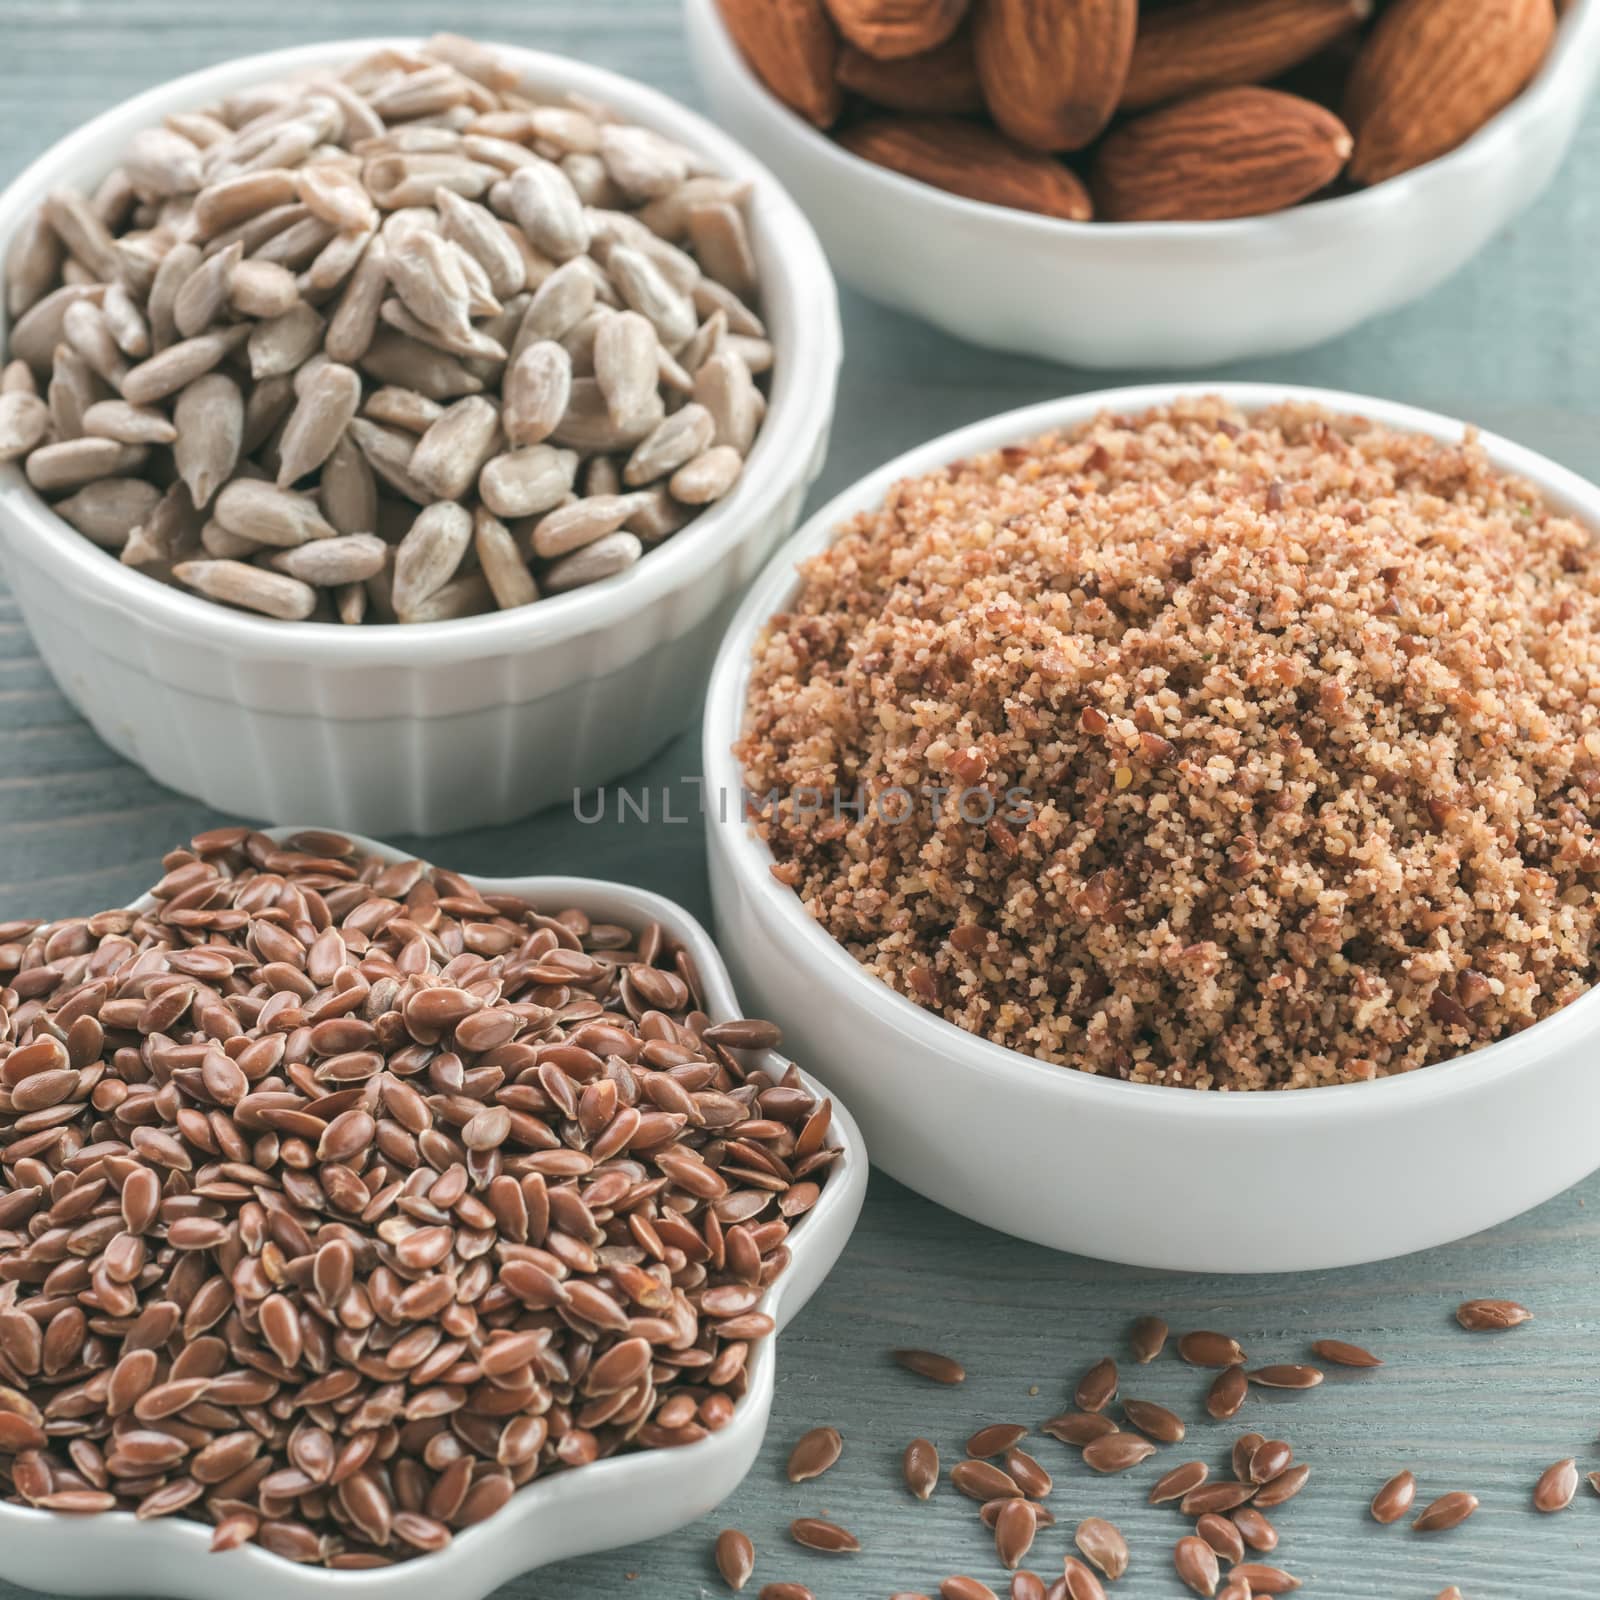 Homemade LSA mix in plate and Linseed or flax seeds, Sunflower seeds and Almonds. Traditional Australian blend of ground, source of dietary fiber, protein, omega fatty acids. Copy space for text.